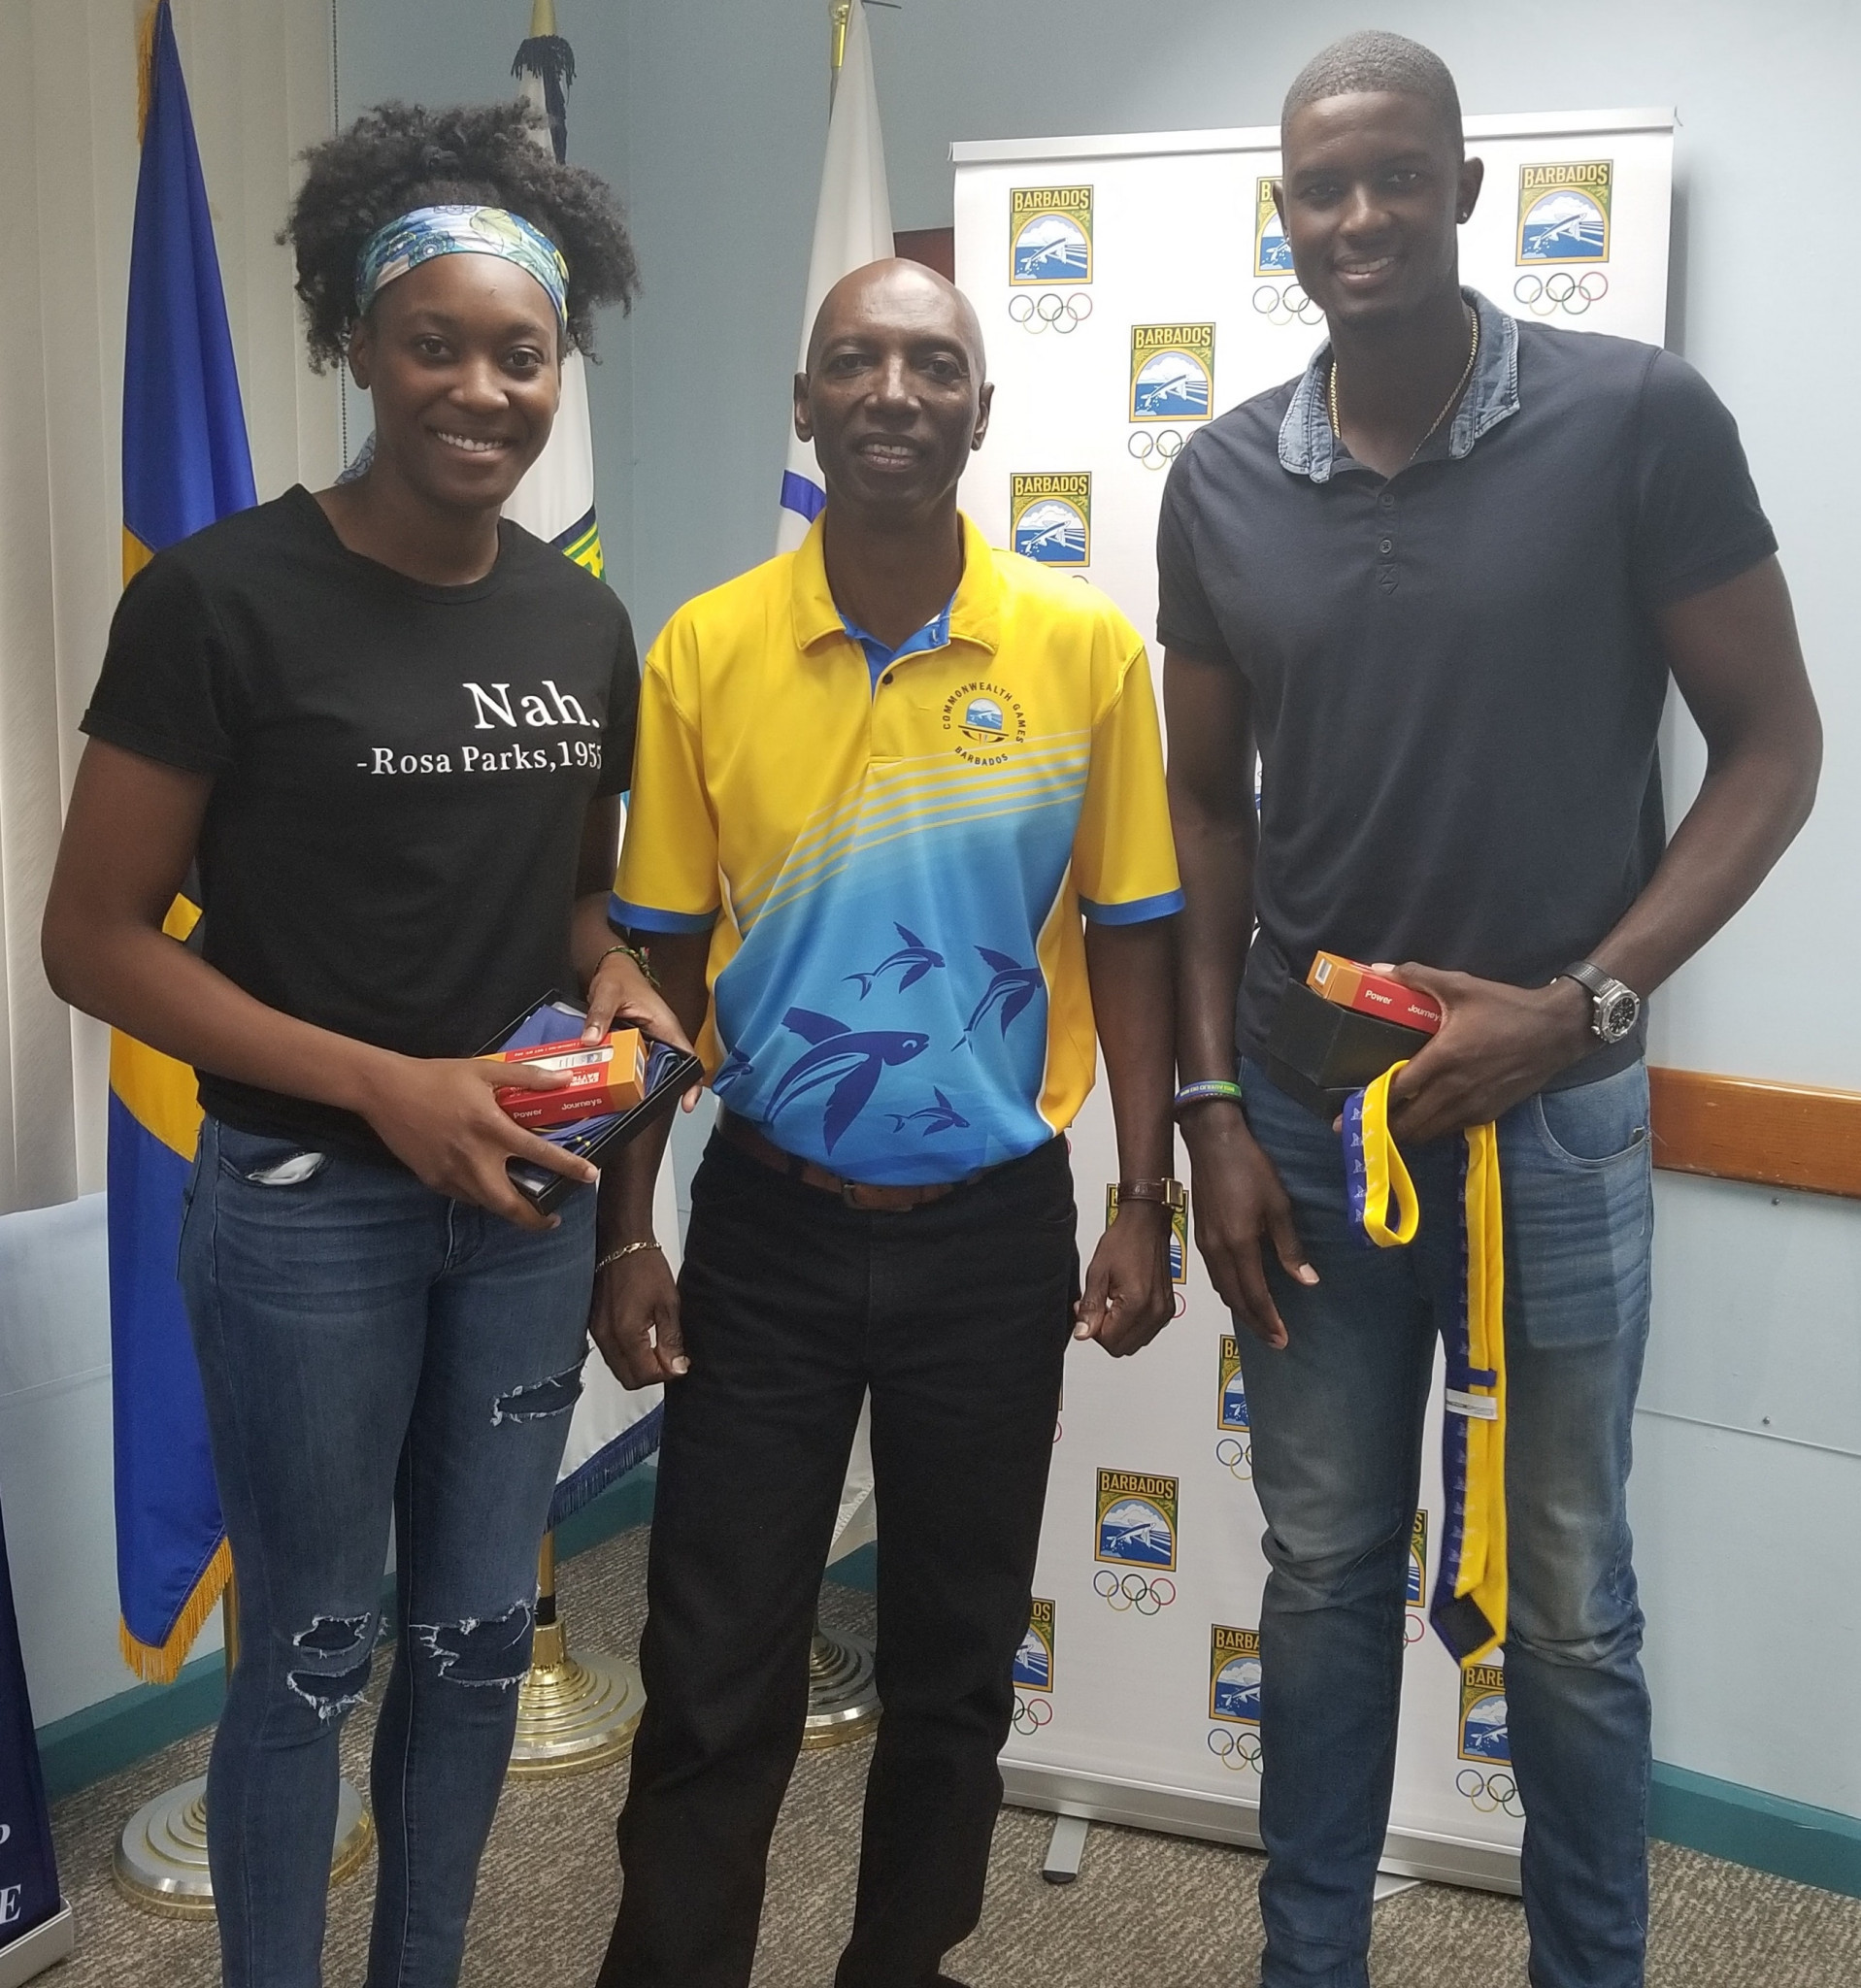 Talks were given at the event by people including Olympian Akela Jones, left, and West Indies cricket captain Jason Holder, right ©BOA